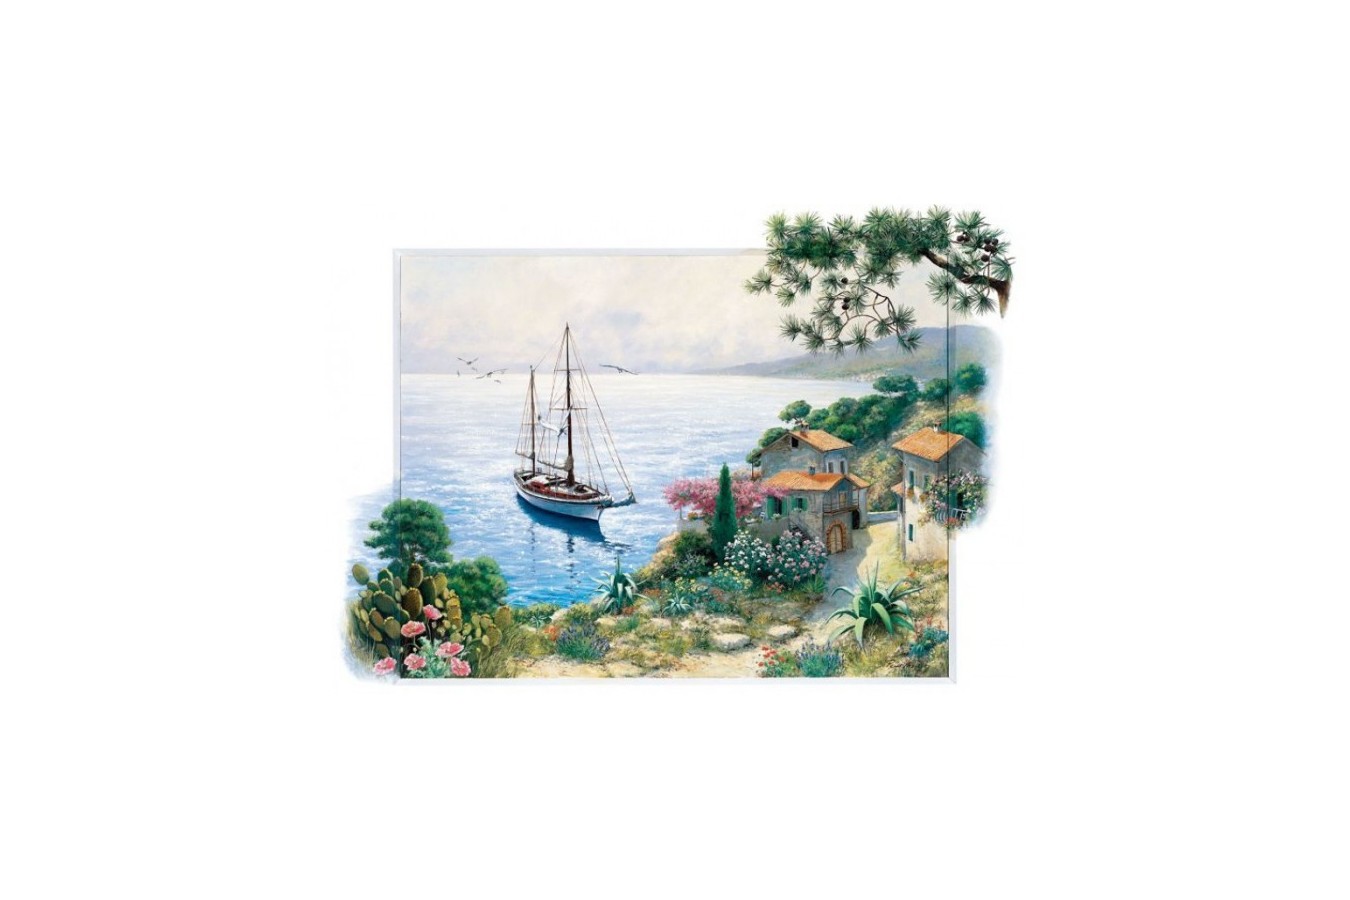 Puzzle Educa - The Bay, 1000 piese (15804)